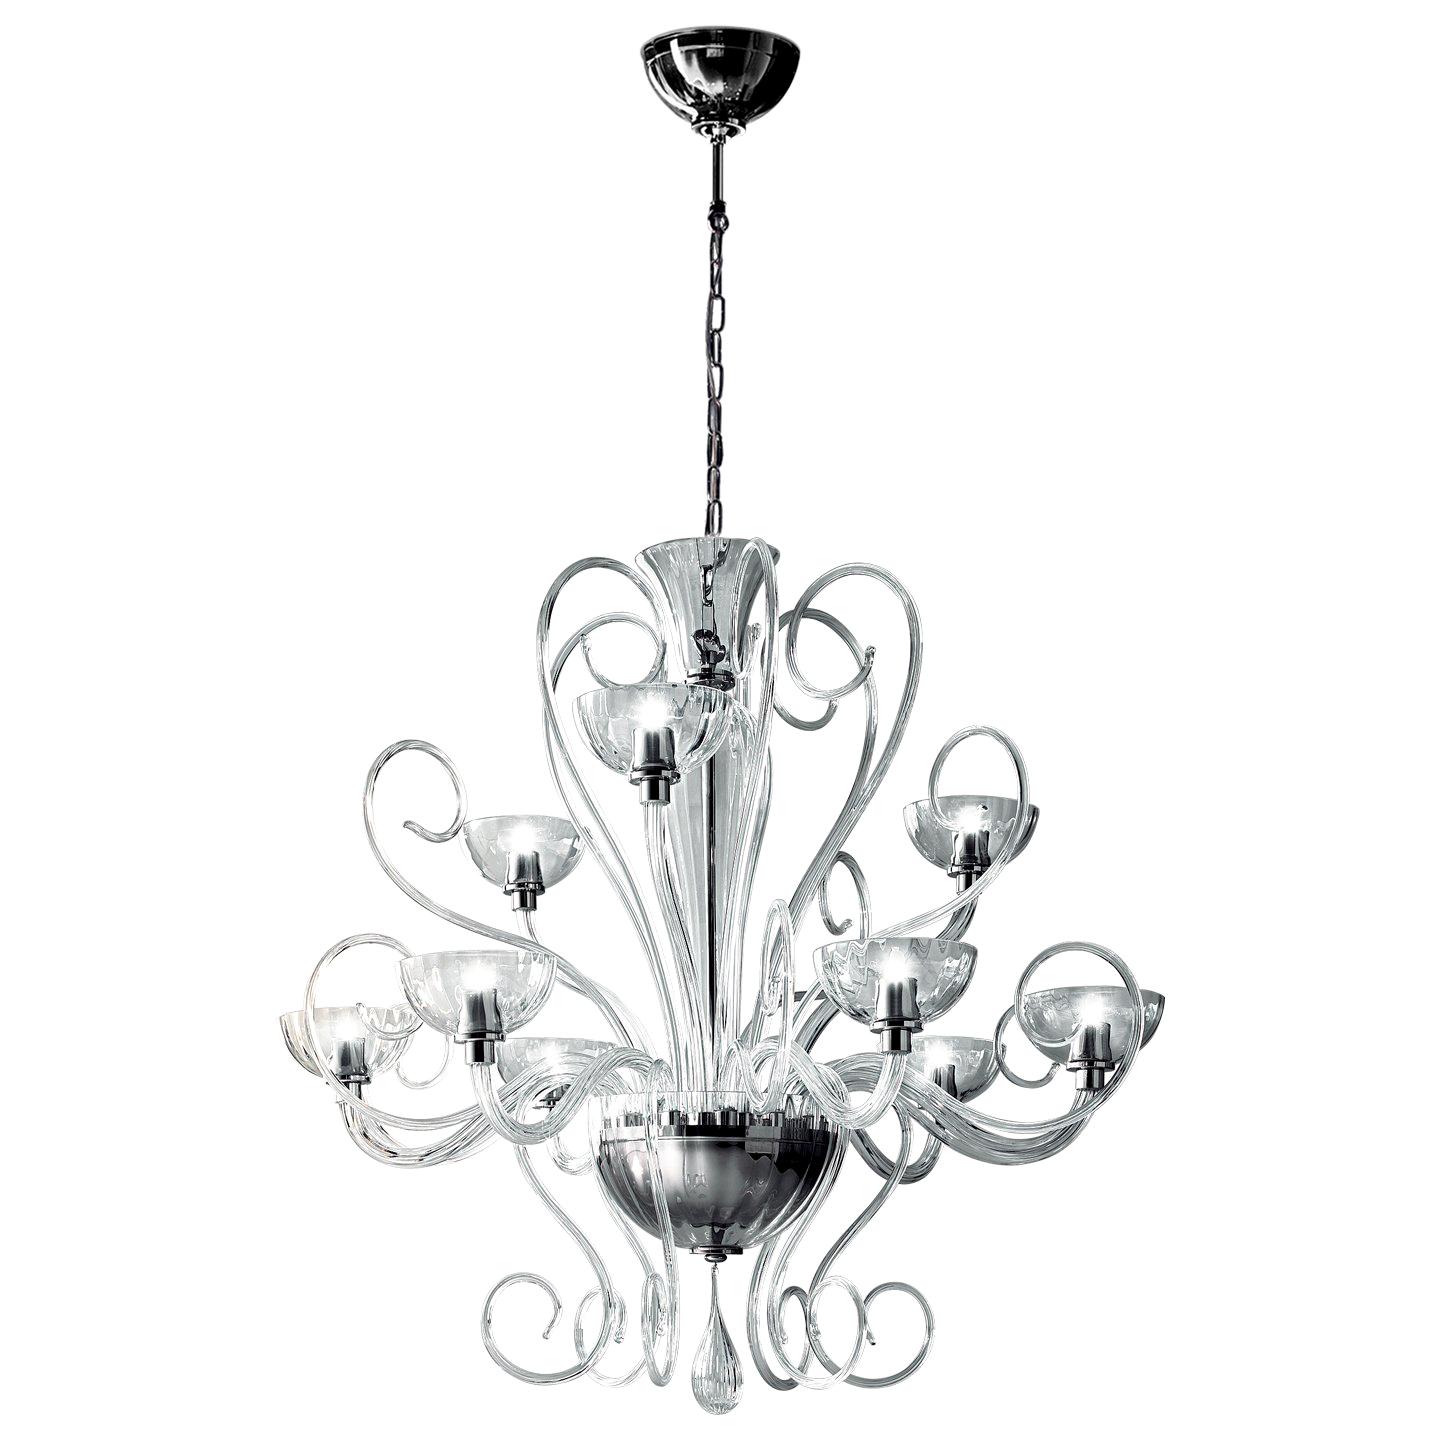 Leucos Bolero L9 Chandelier in Crystal and Chrome by Carlo Nason For Sale